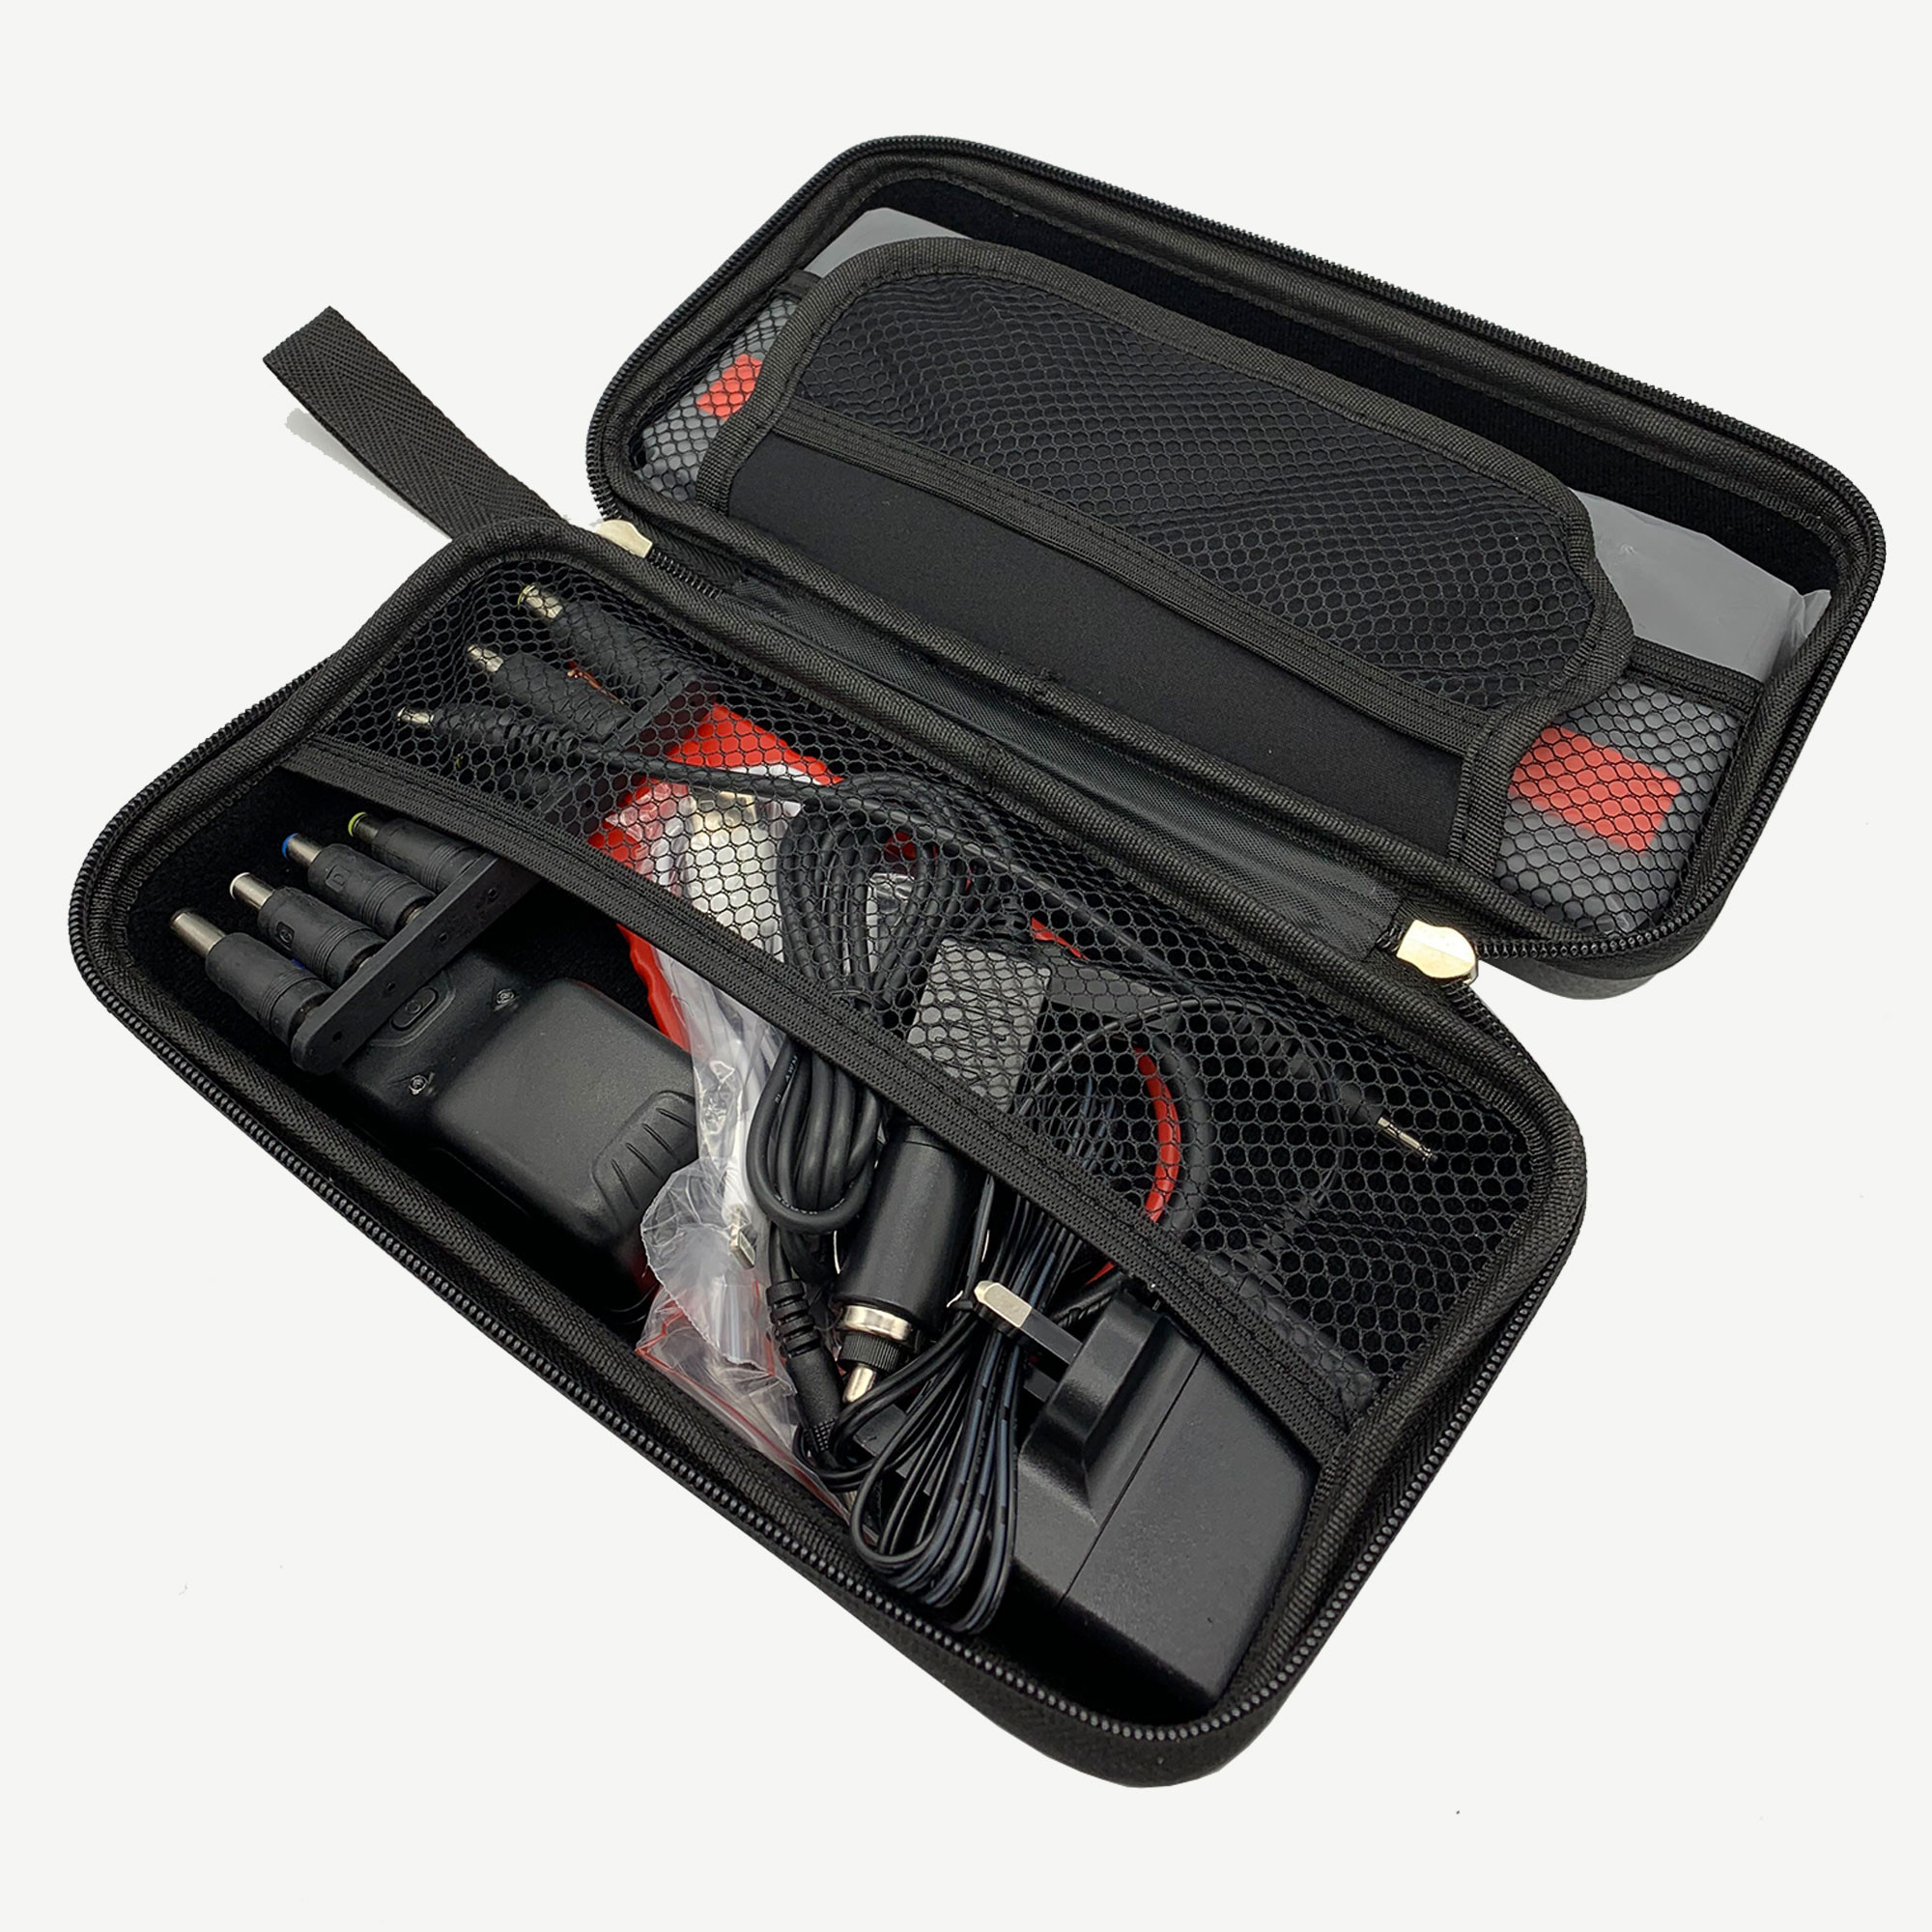 Xs Powerpack Multi Function Jump Starter Start Current 300A Peak Current 600A, Complete with Torch.